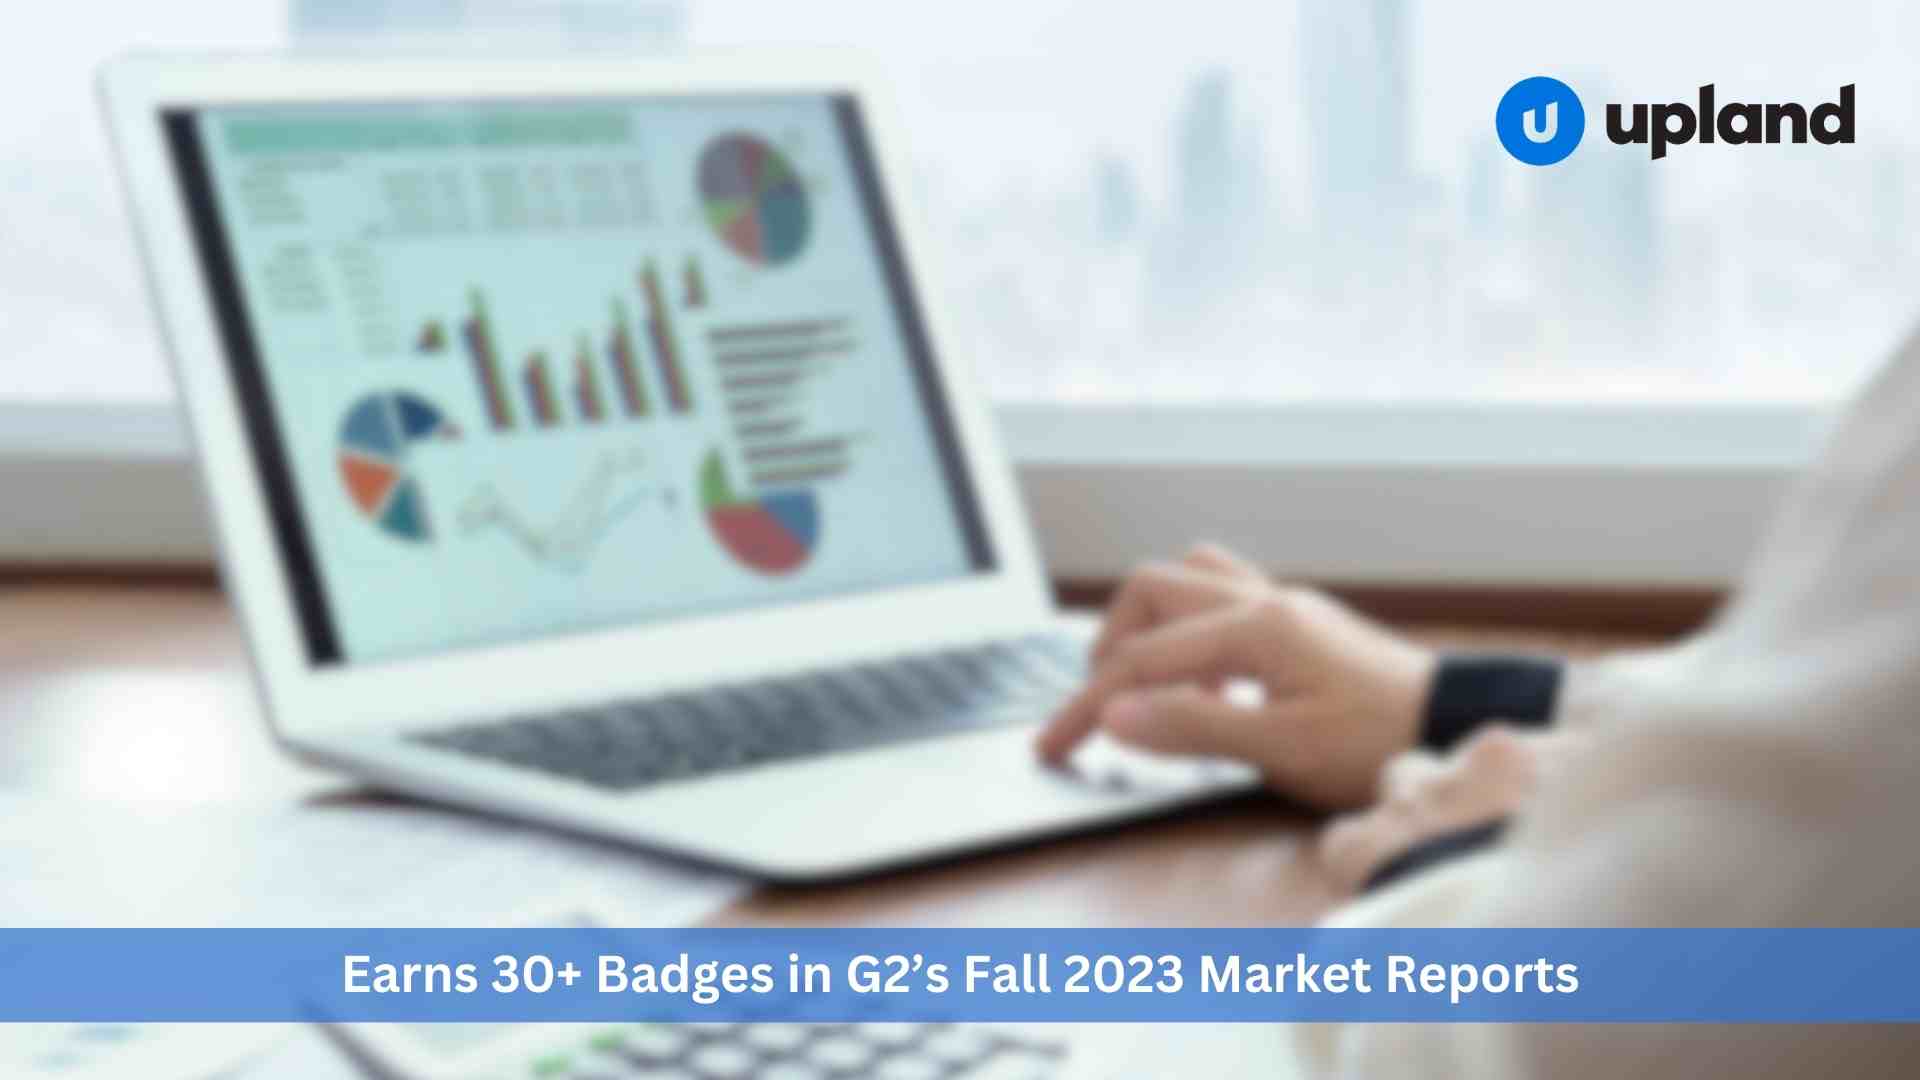 Upland Software Earns 30+ Badges in G2’s Fall 2023 Market Reports